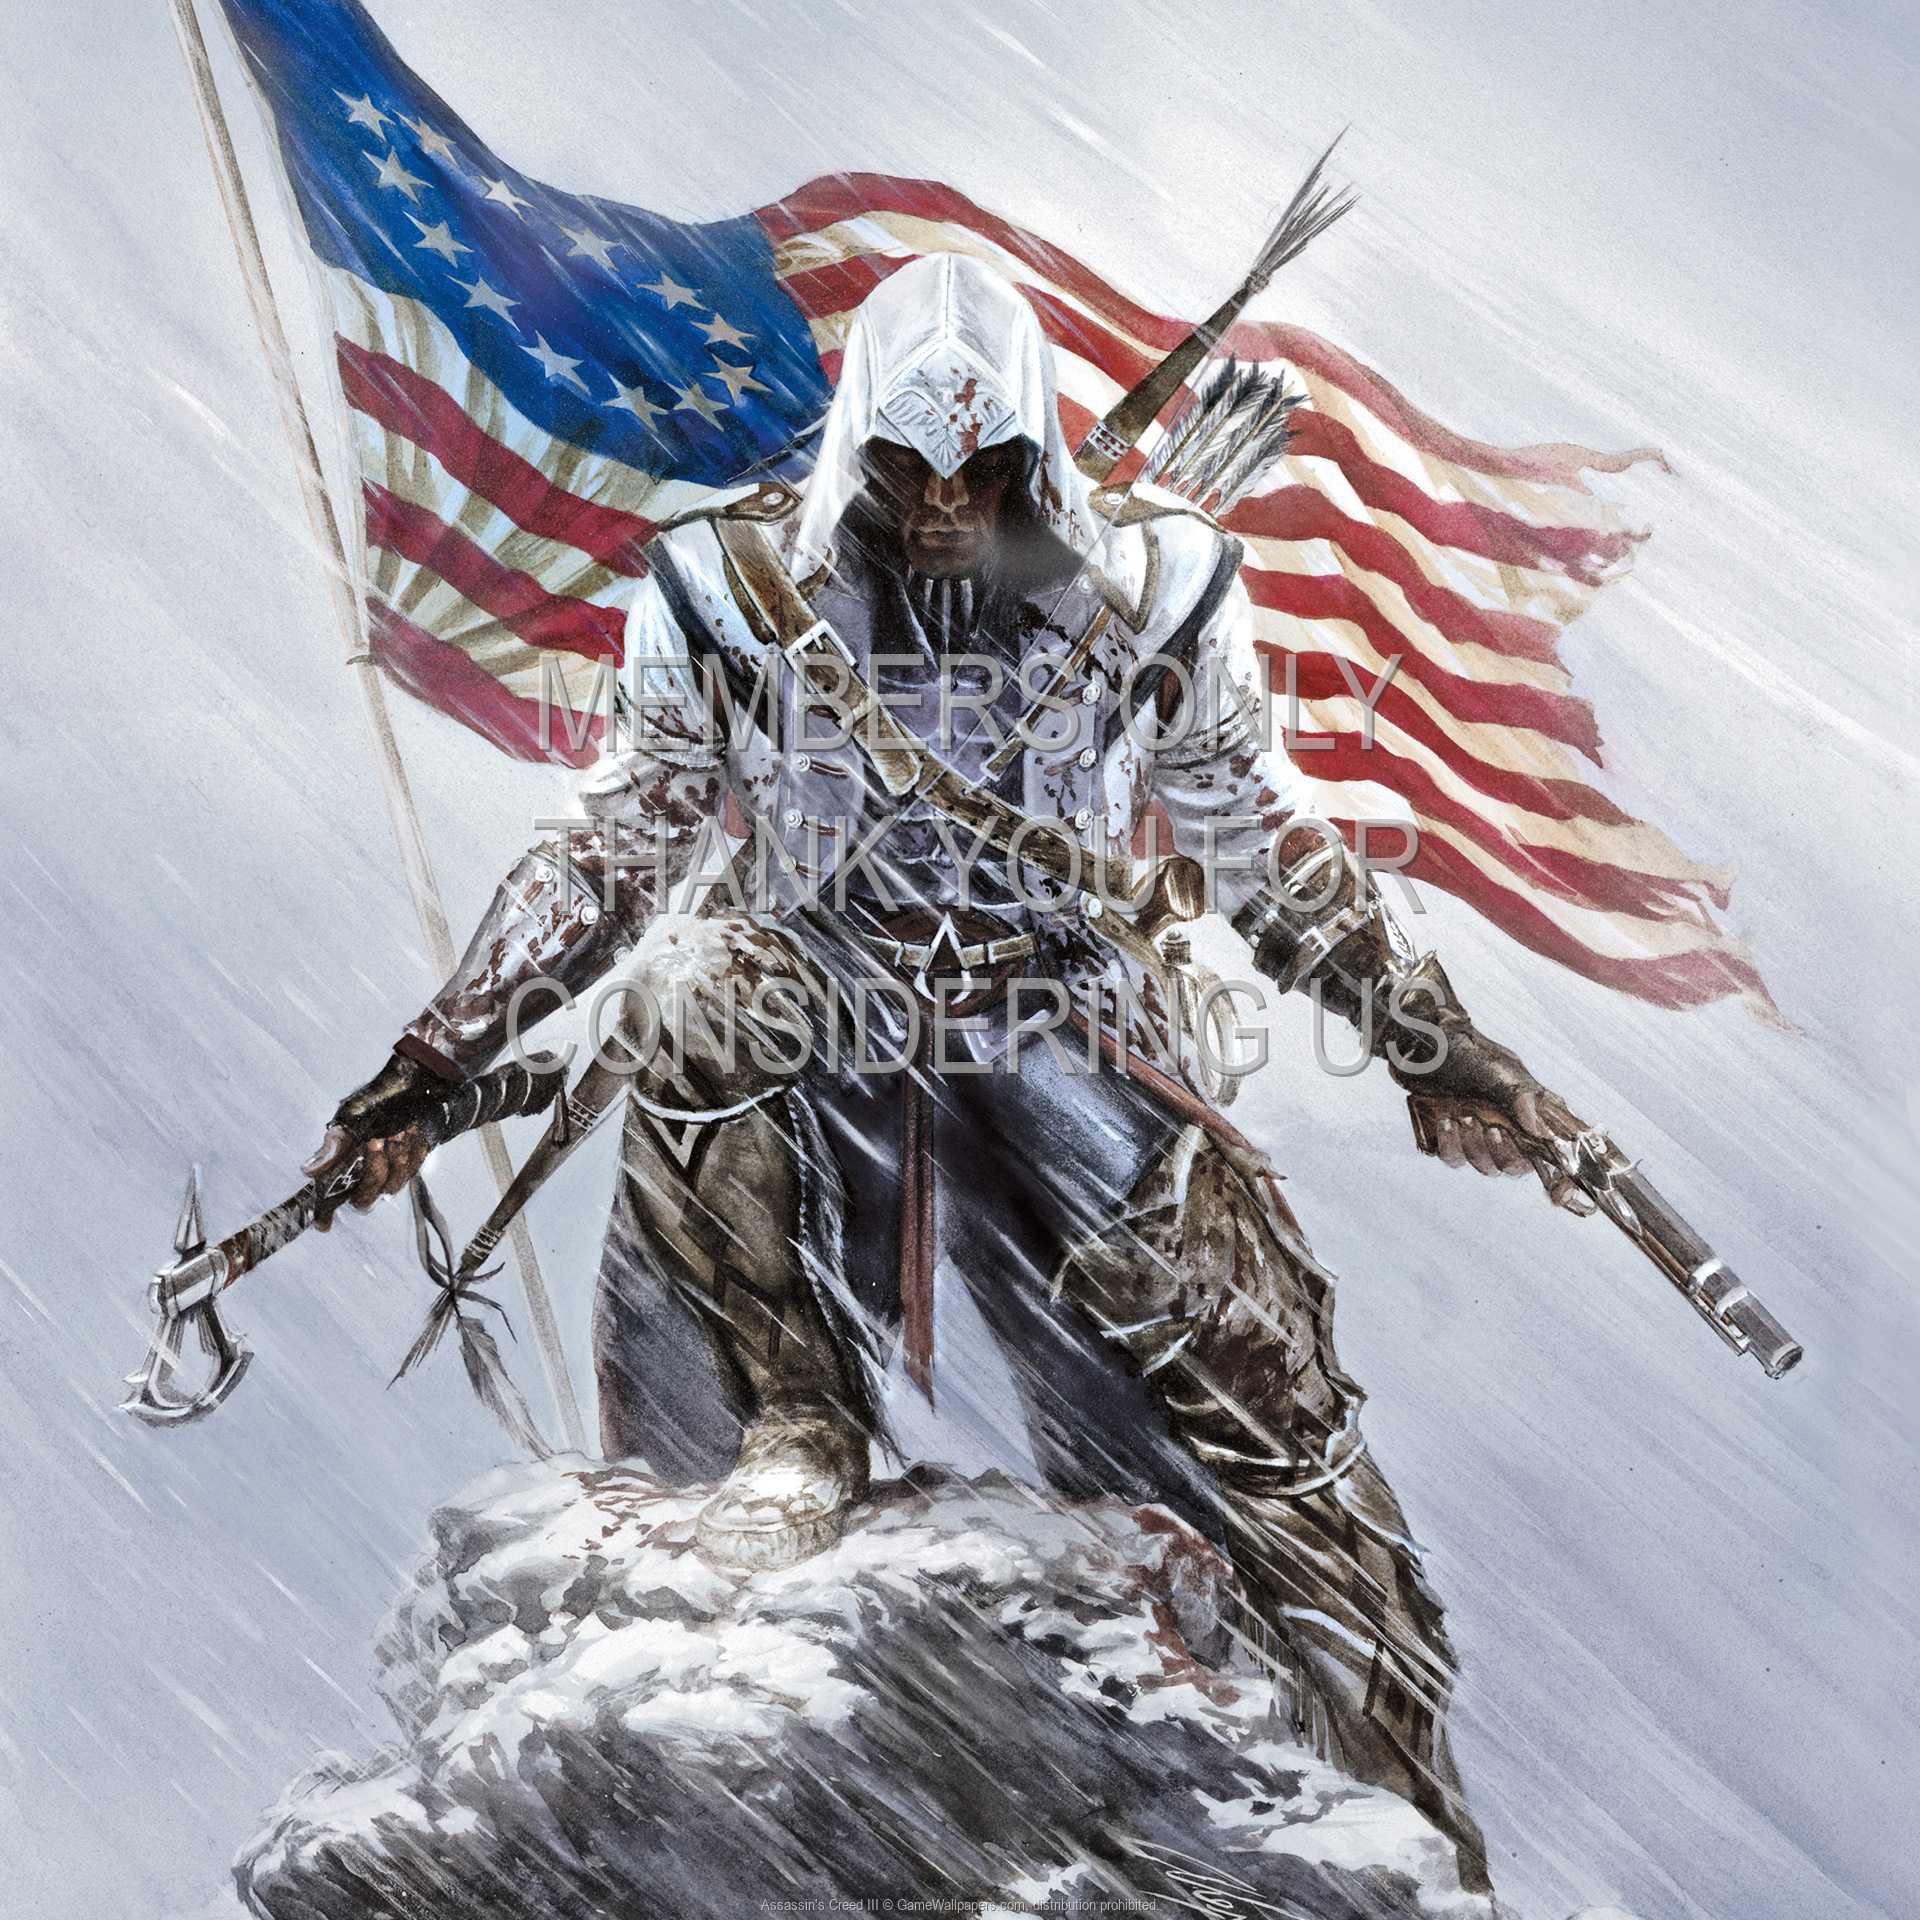 Assassin's Creed III Wallpapers